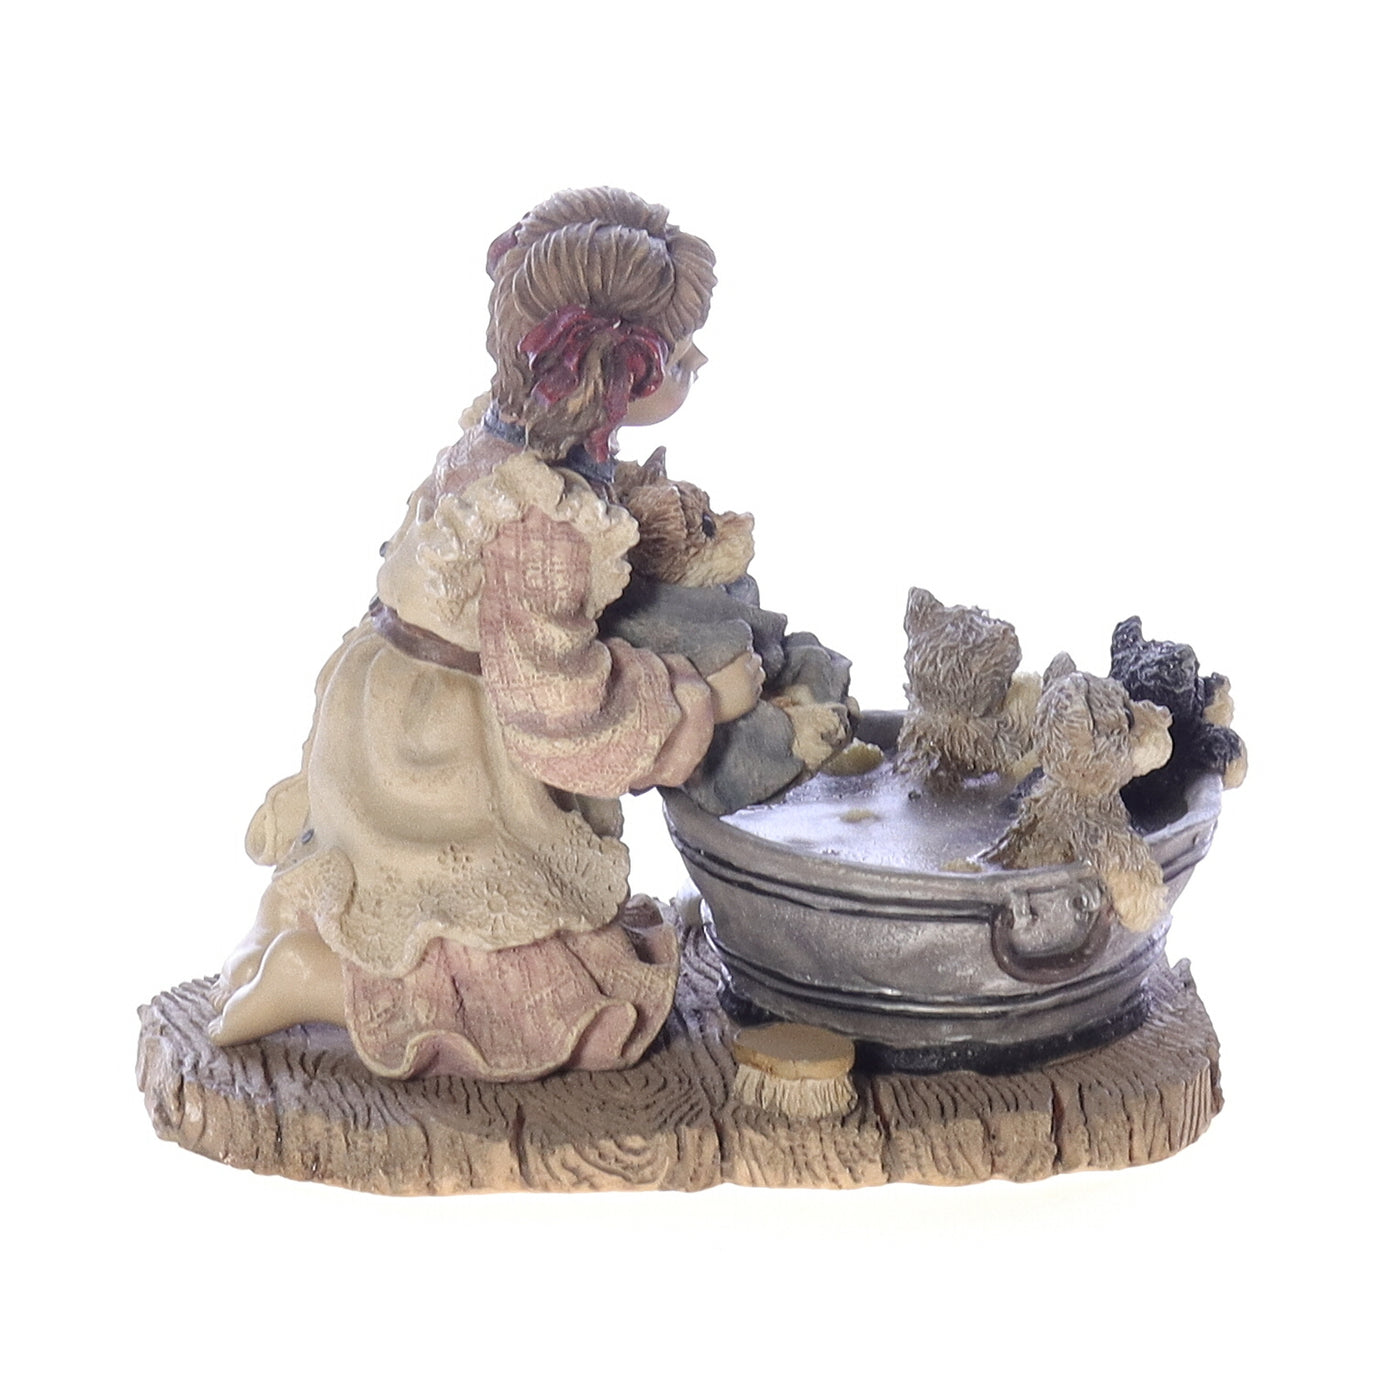 The_Dollstone_Collection_3521_Wendy_with_Bronte_Keats_Tennyson_and_Poe_Wash_Day_Cat_Figurine_1997 Front View